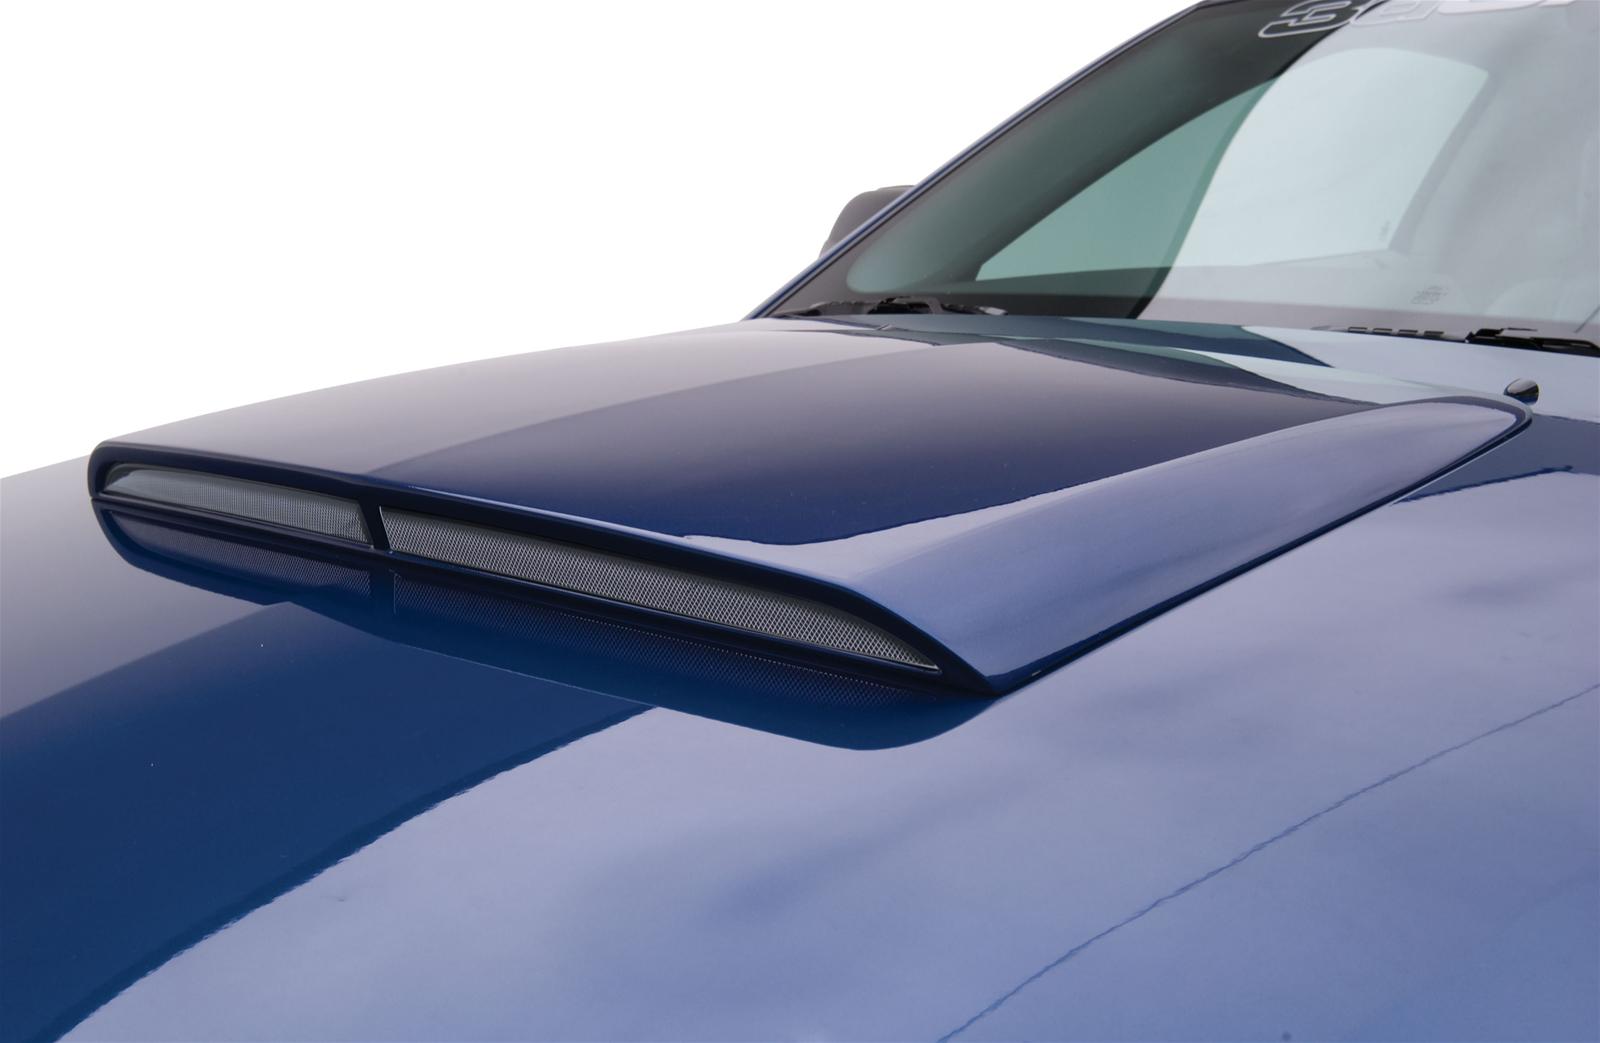 3dcarbon Hood Scoops 691017 Free Shipping On Orders Over 99 At